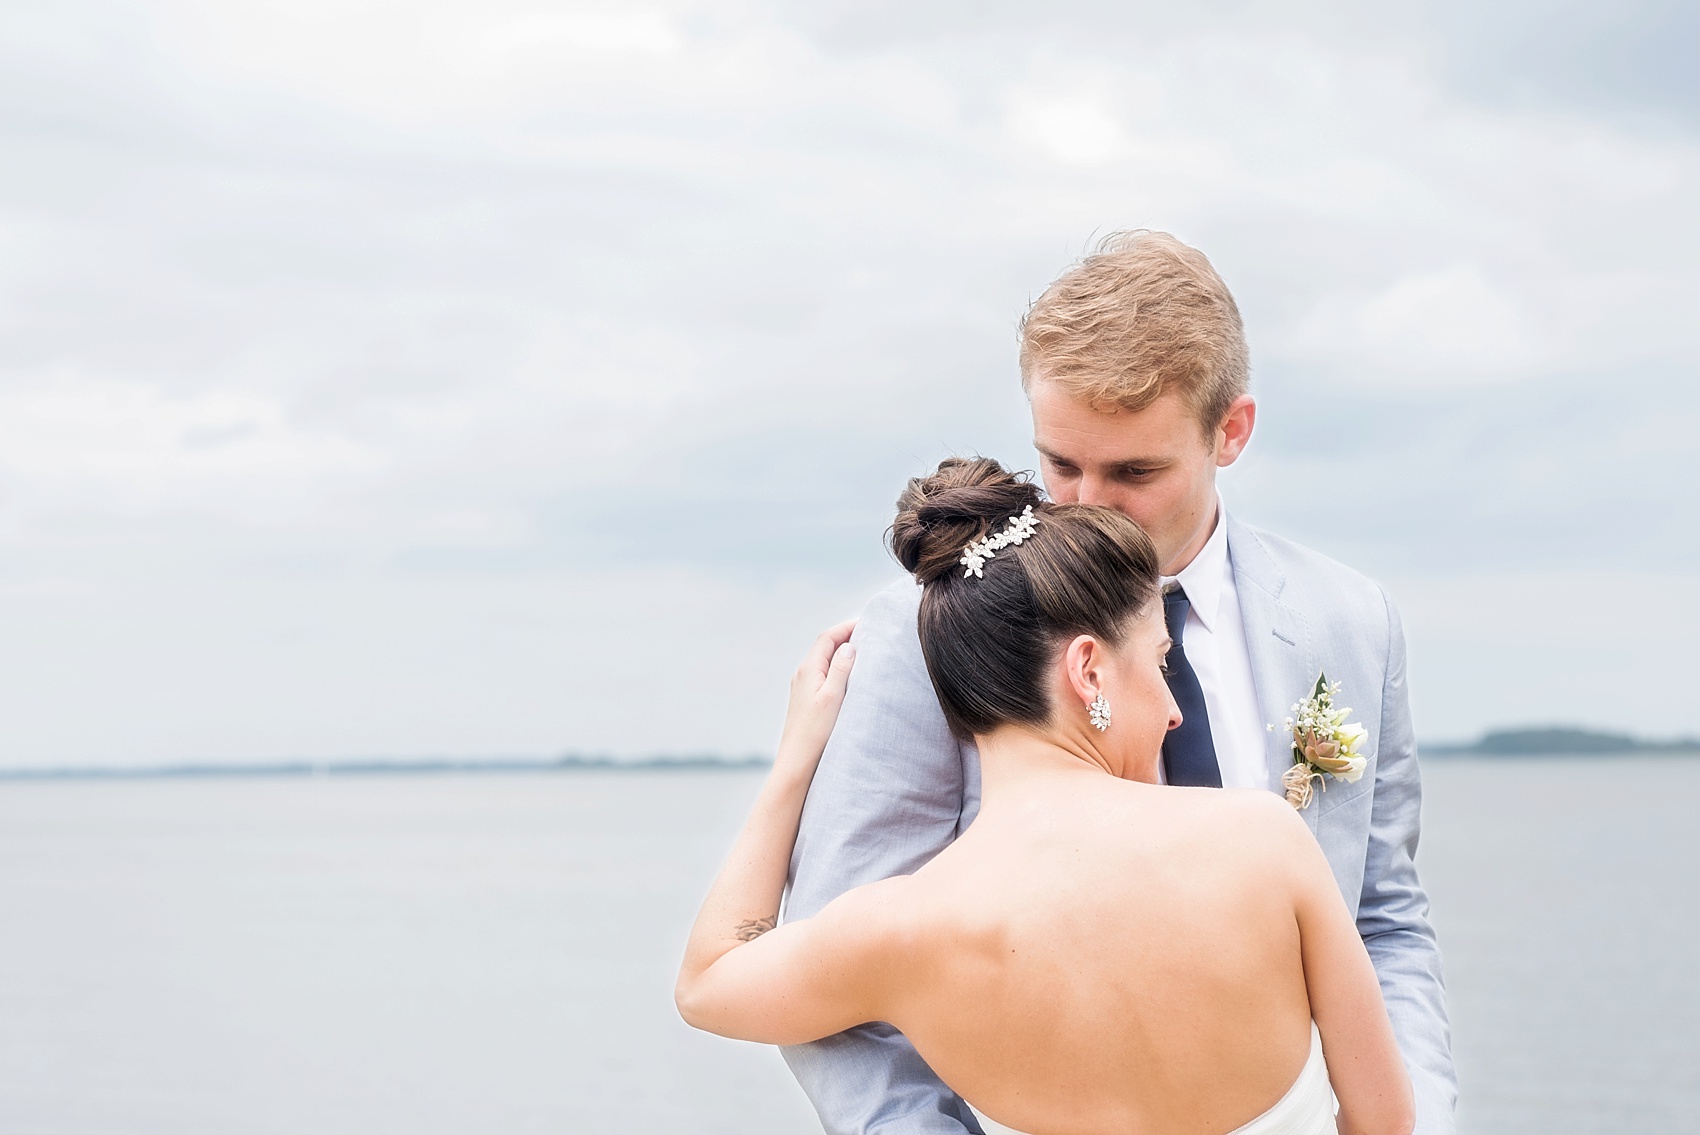 Hilton Head Island wedding photographer, Mikkel Paige, captures a wedding party at Daufuskie Island, Haig Point. Bridesmaids in blush pink dresses and groomsmen in navy blue suits. The couple shares a beach embrace.